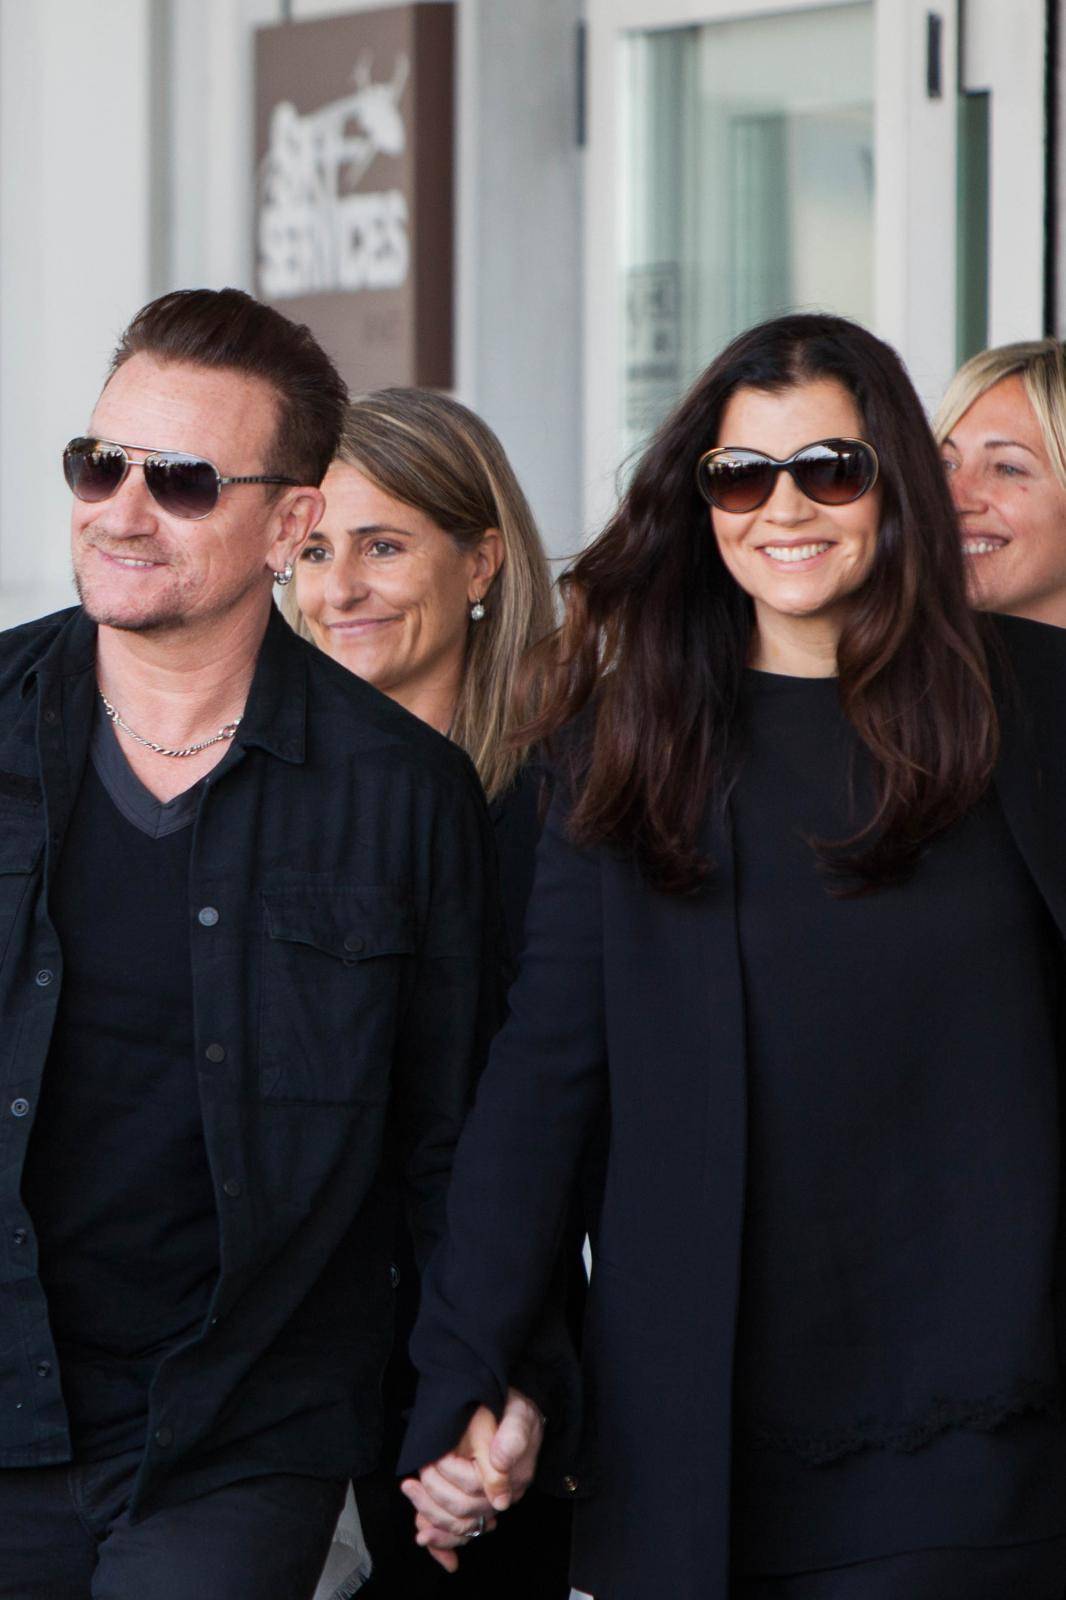 Venice, Wedding of George Clooney and Amal Alamuddin, arrival of Bono Vox